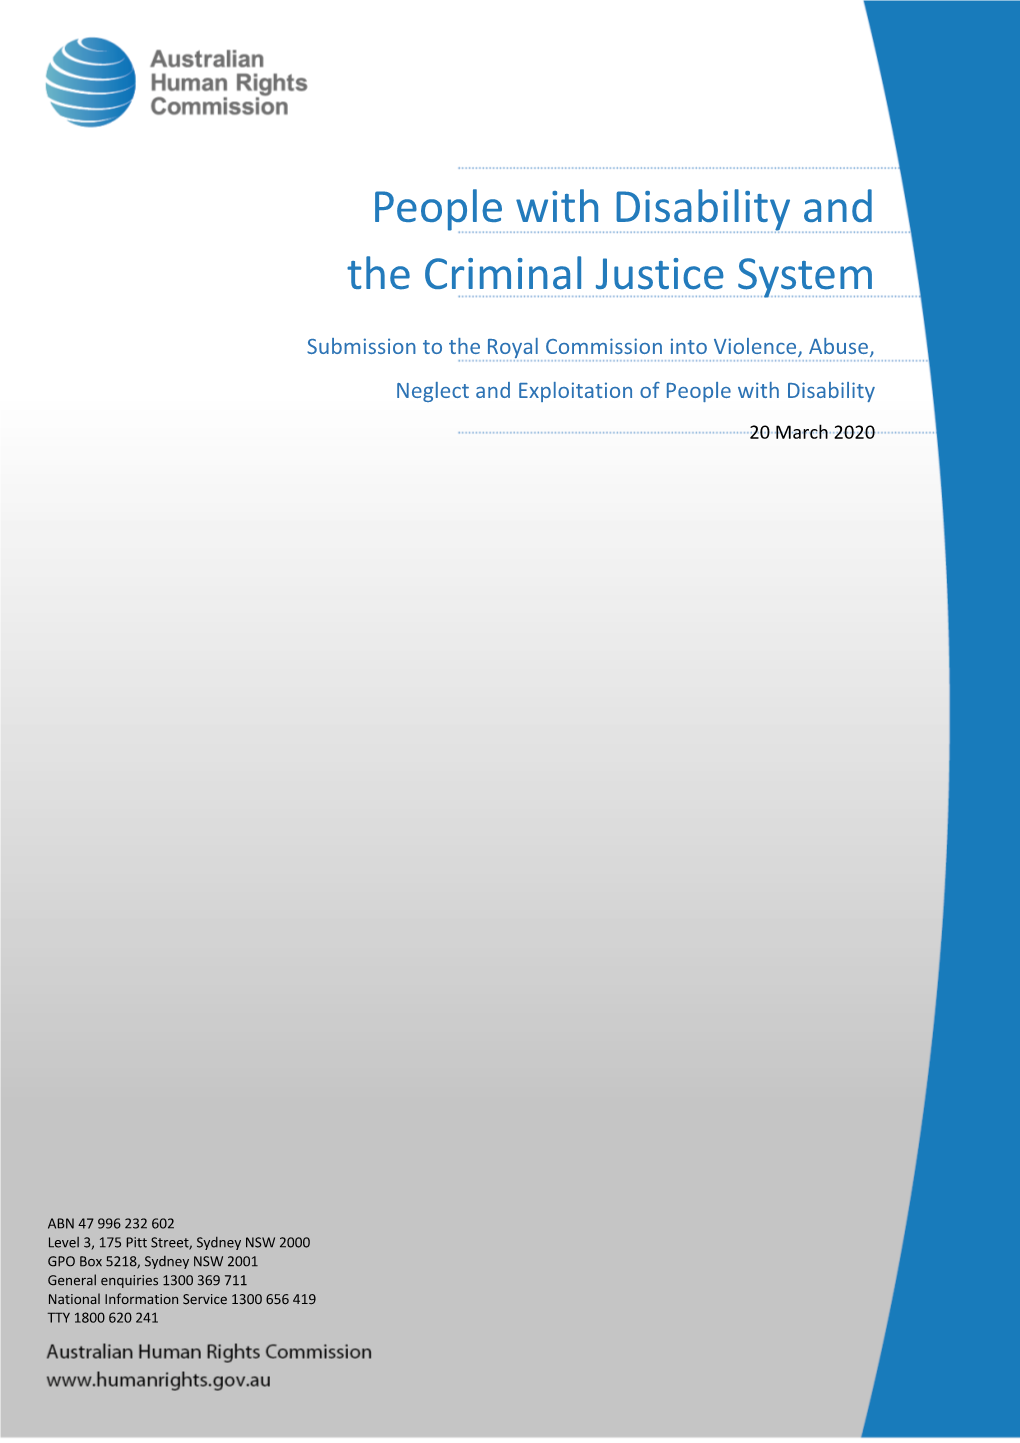 People with Disability and the Criminal Justice System